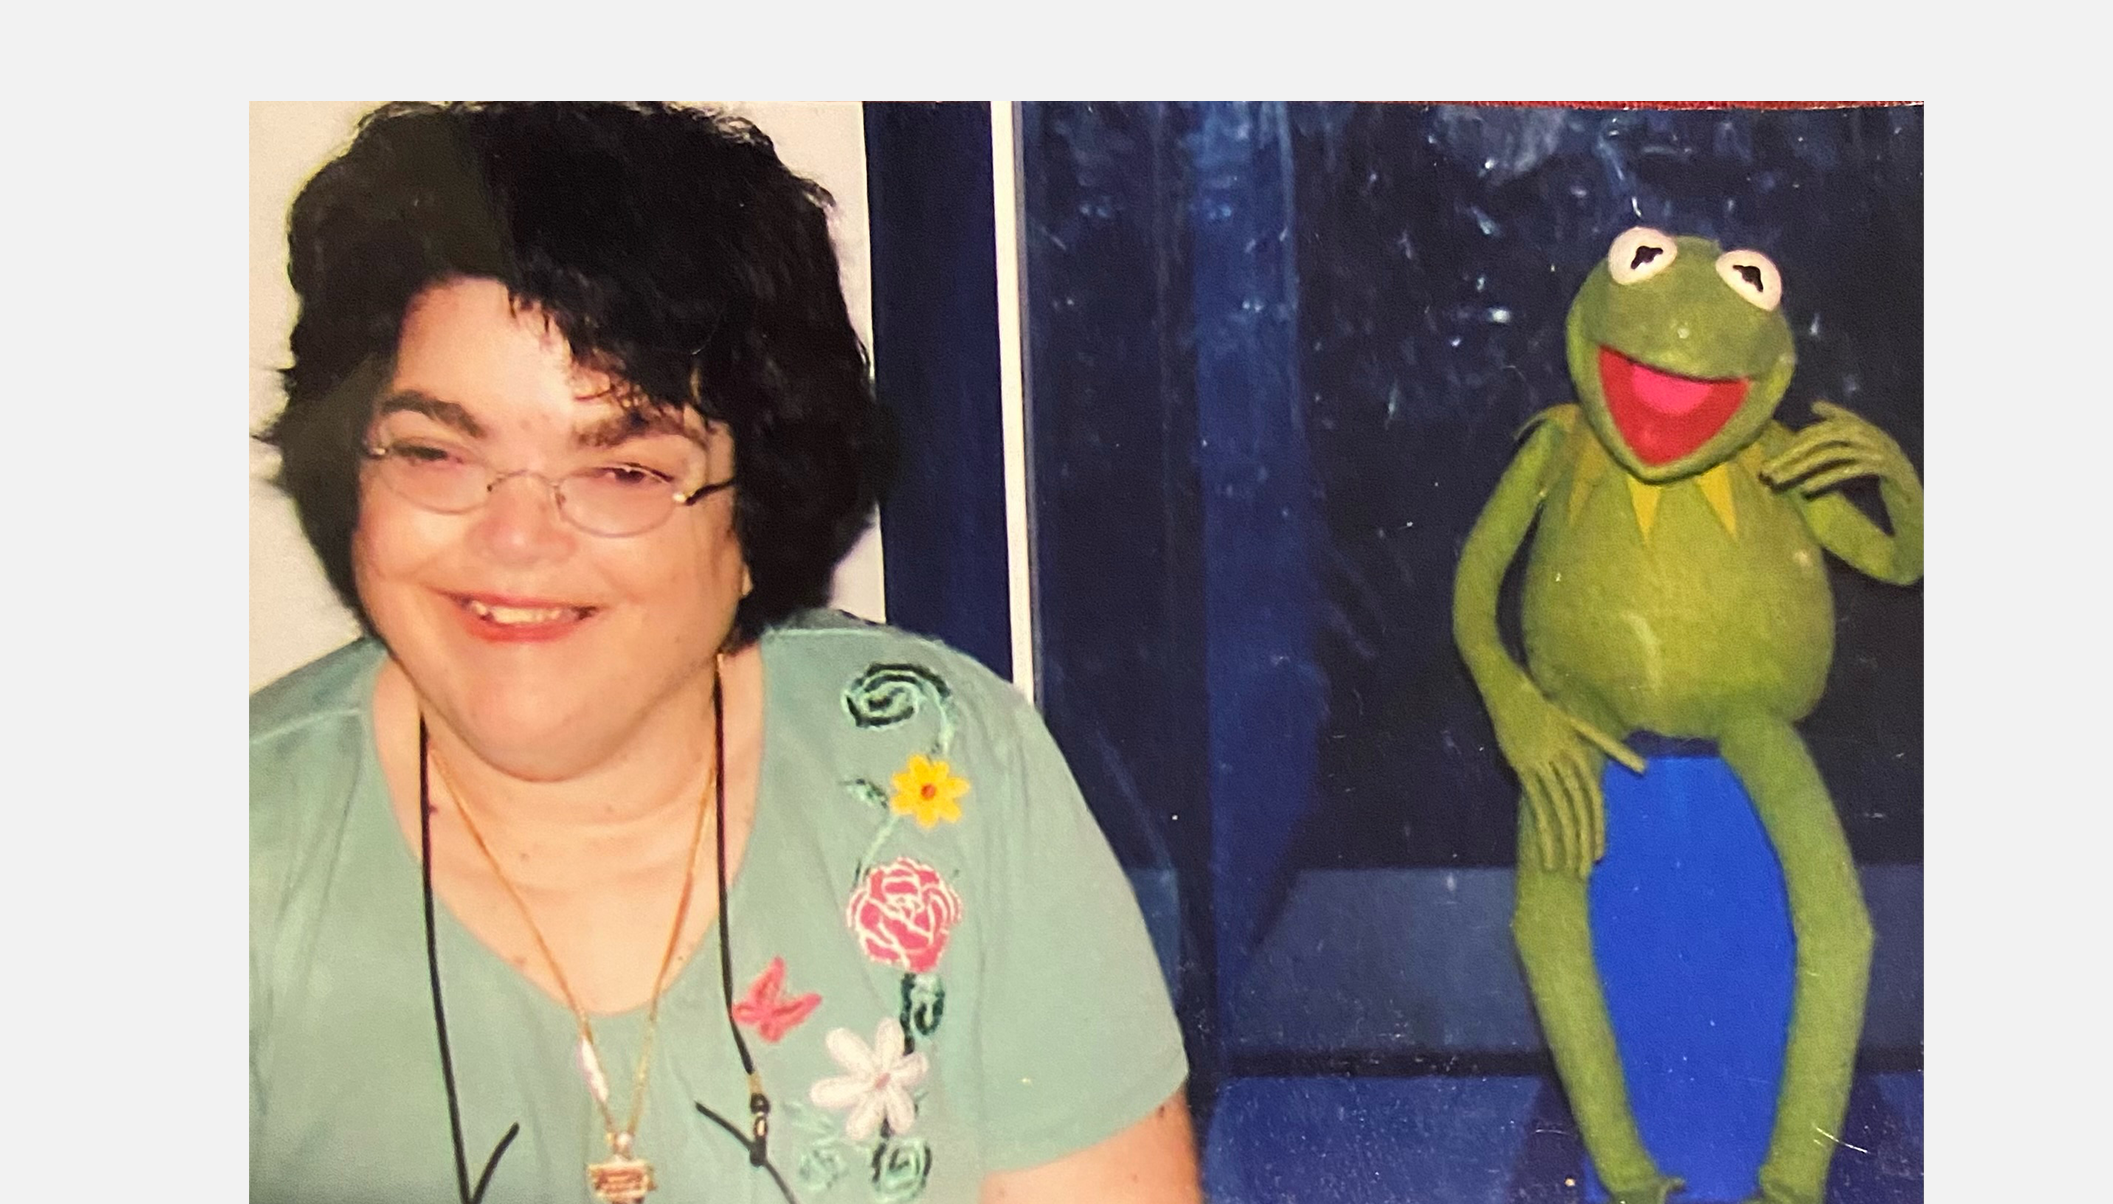 A woman poses with Kermit the Frog